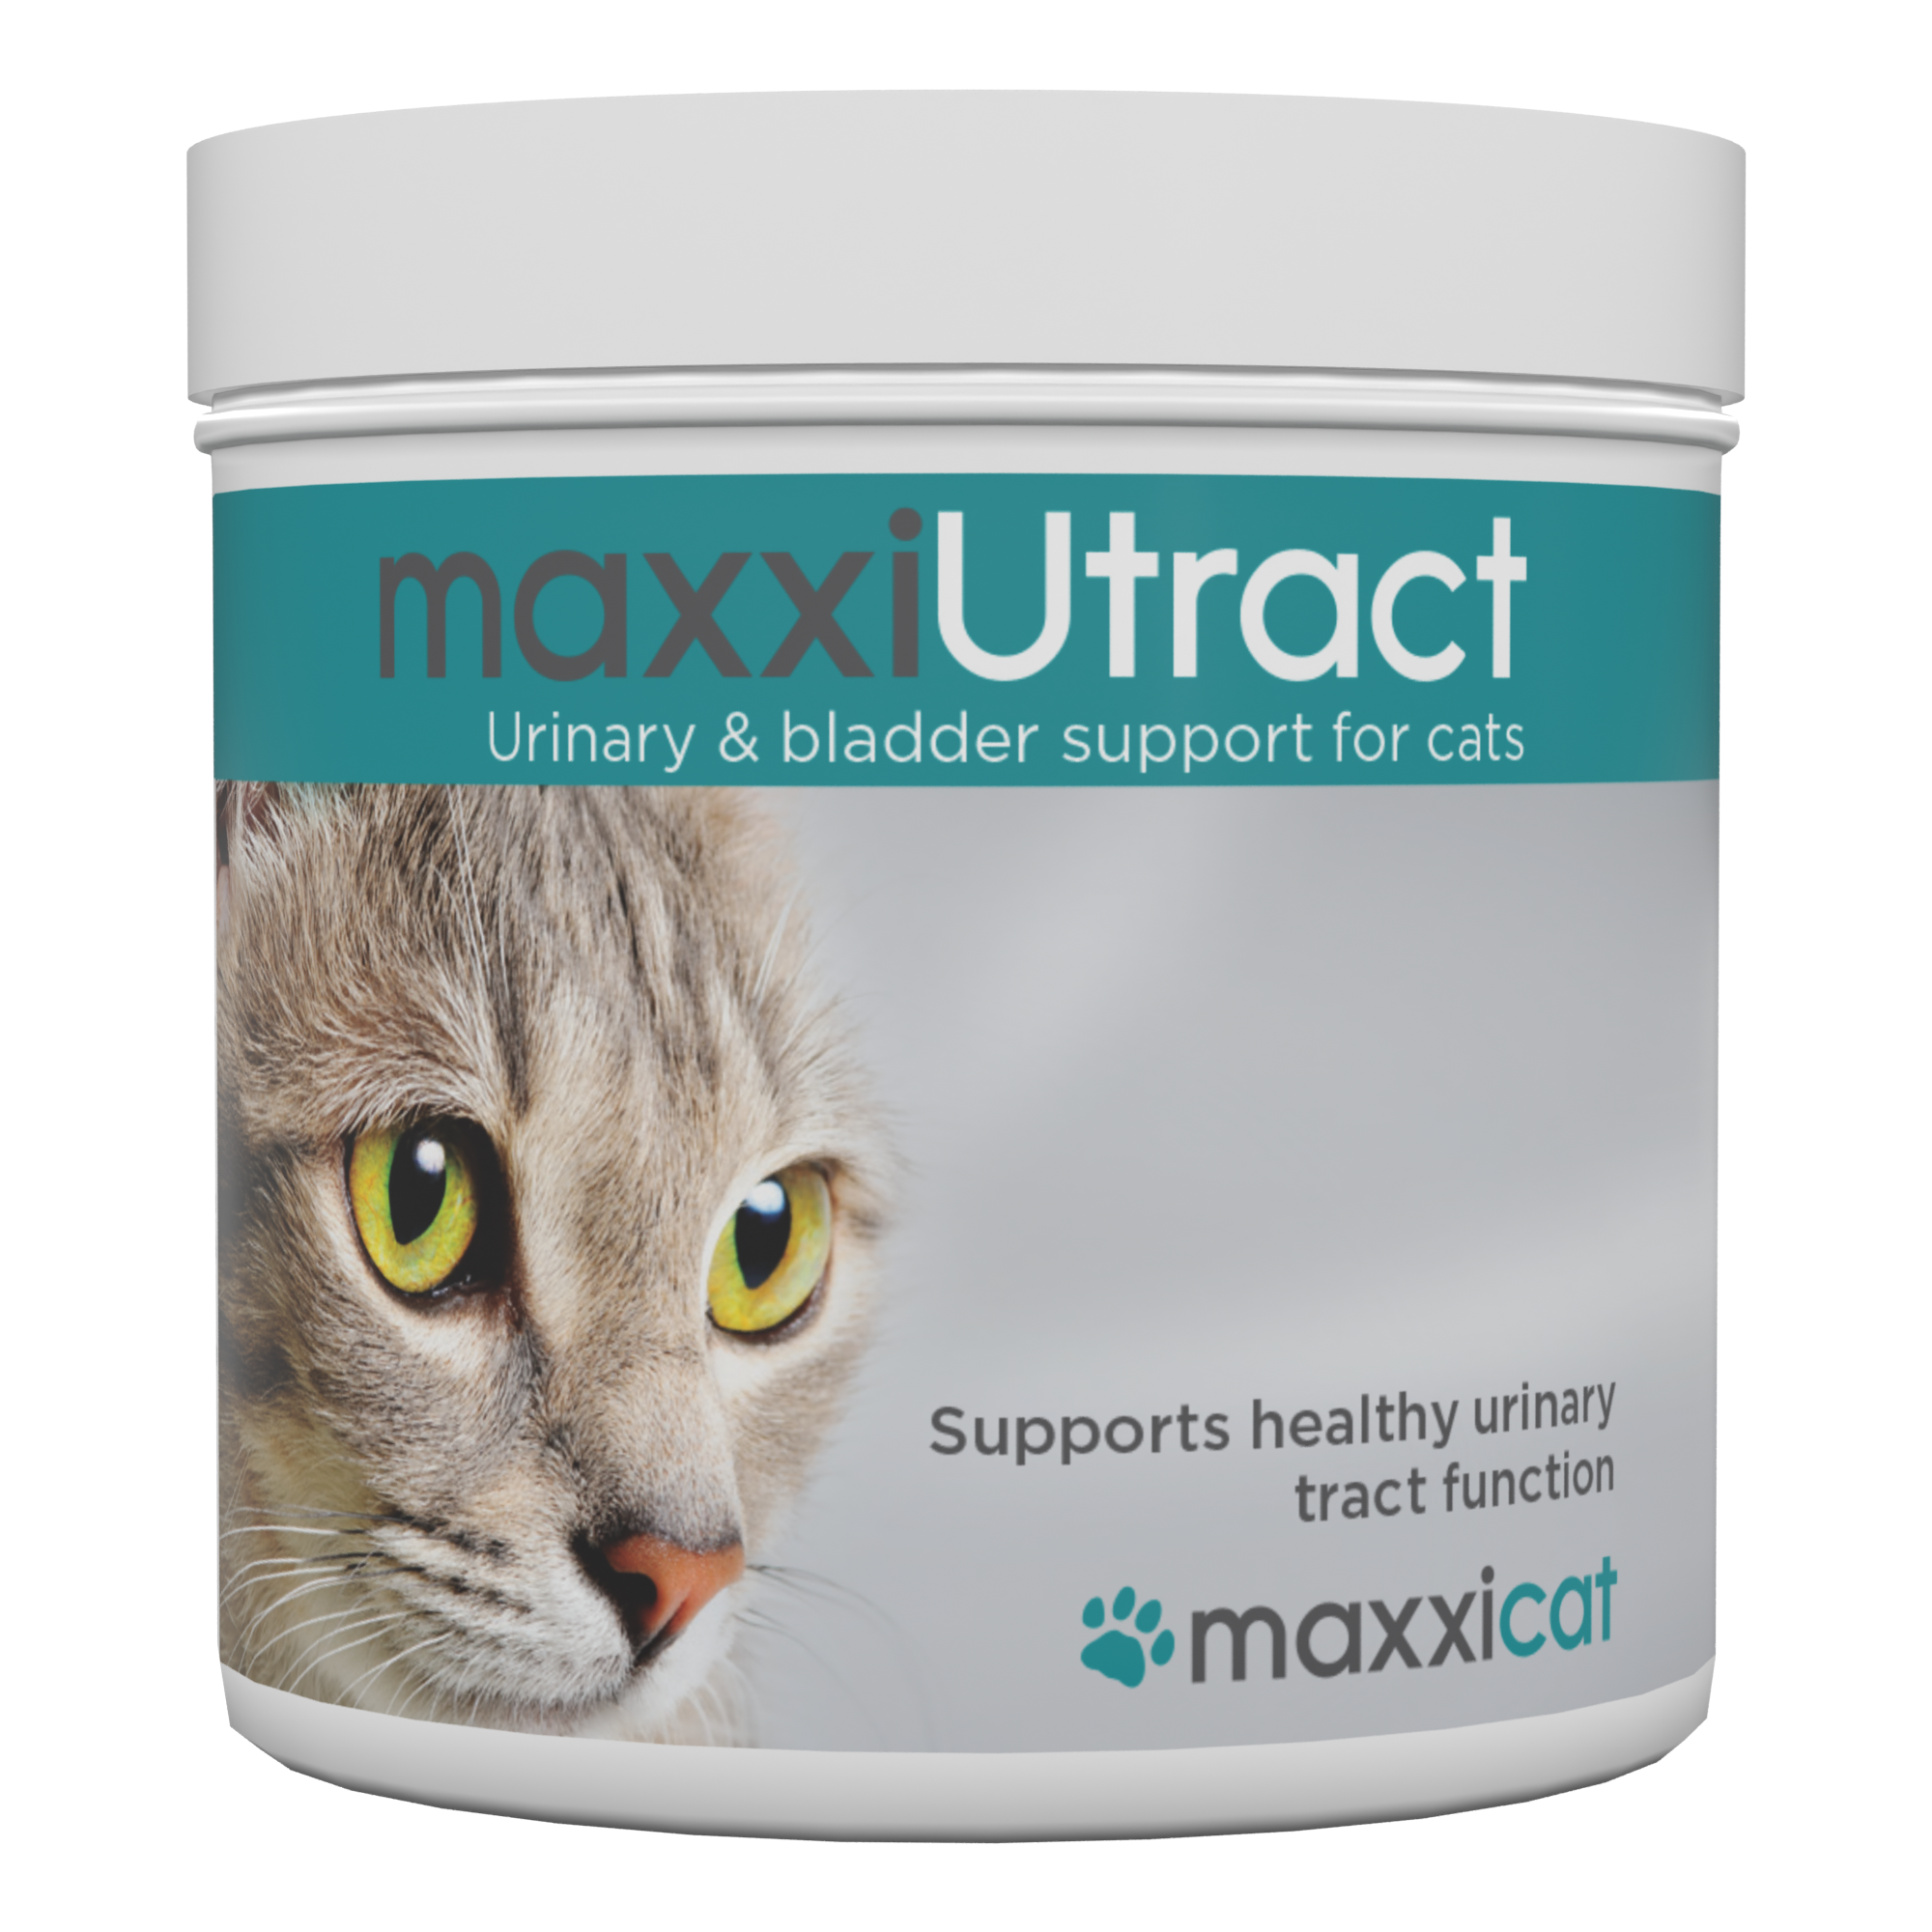 MaxxiPaws MaxxiUtract Urinary Supplement for Cats Trial Pack (Free gift with purchase above $99)